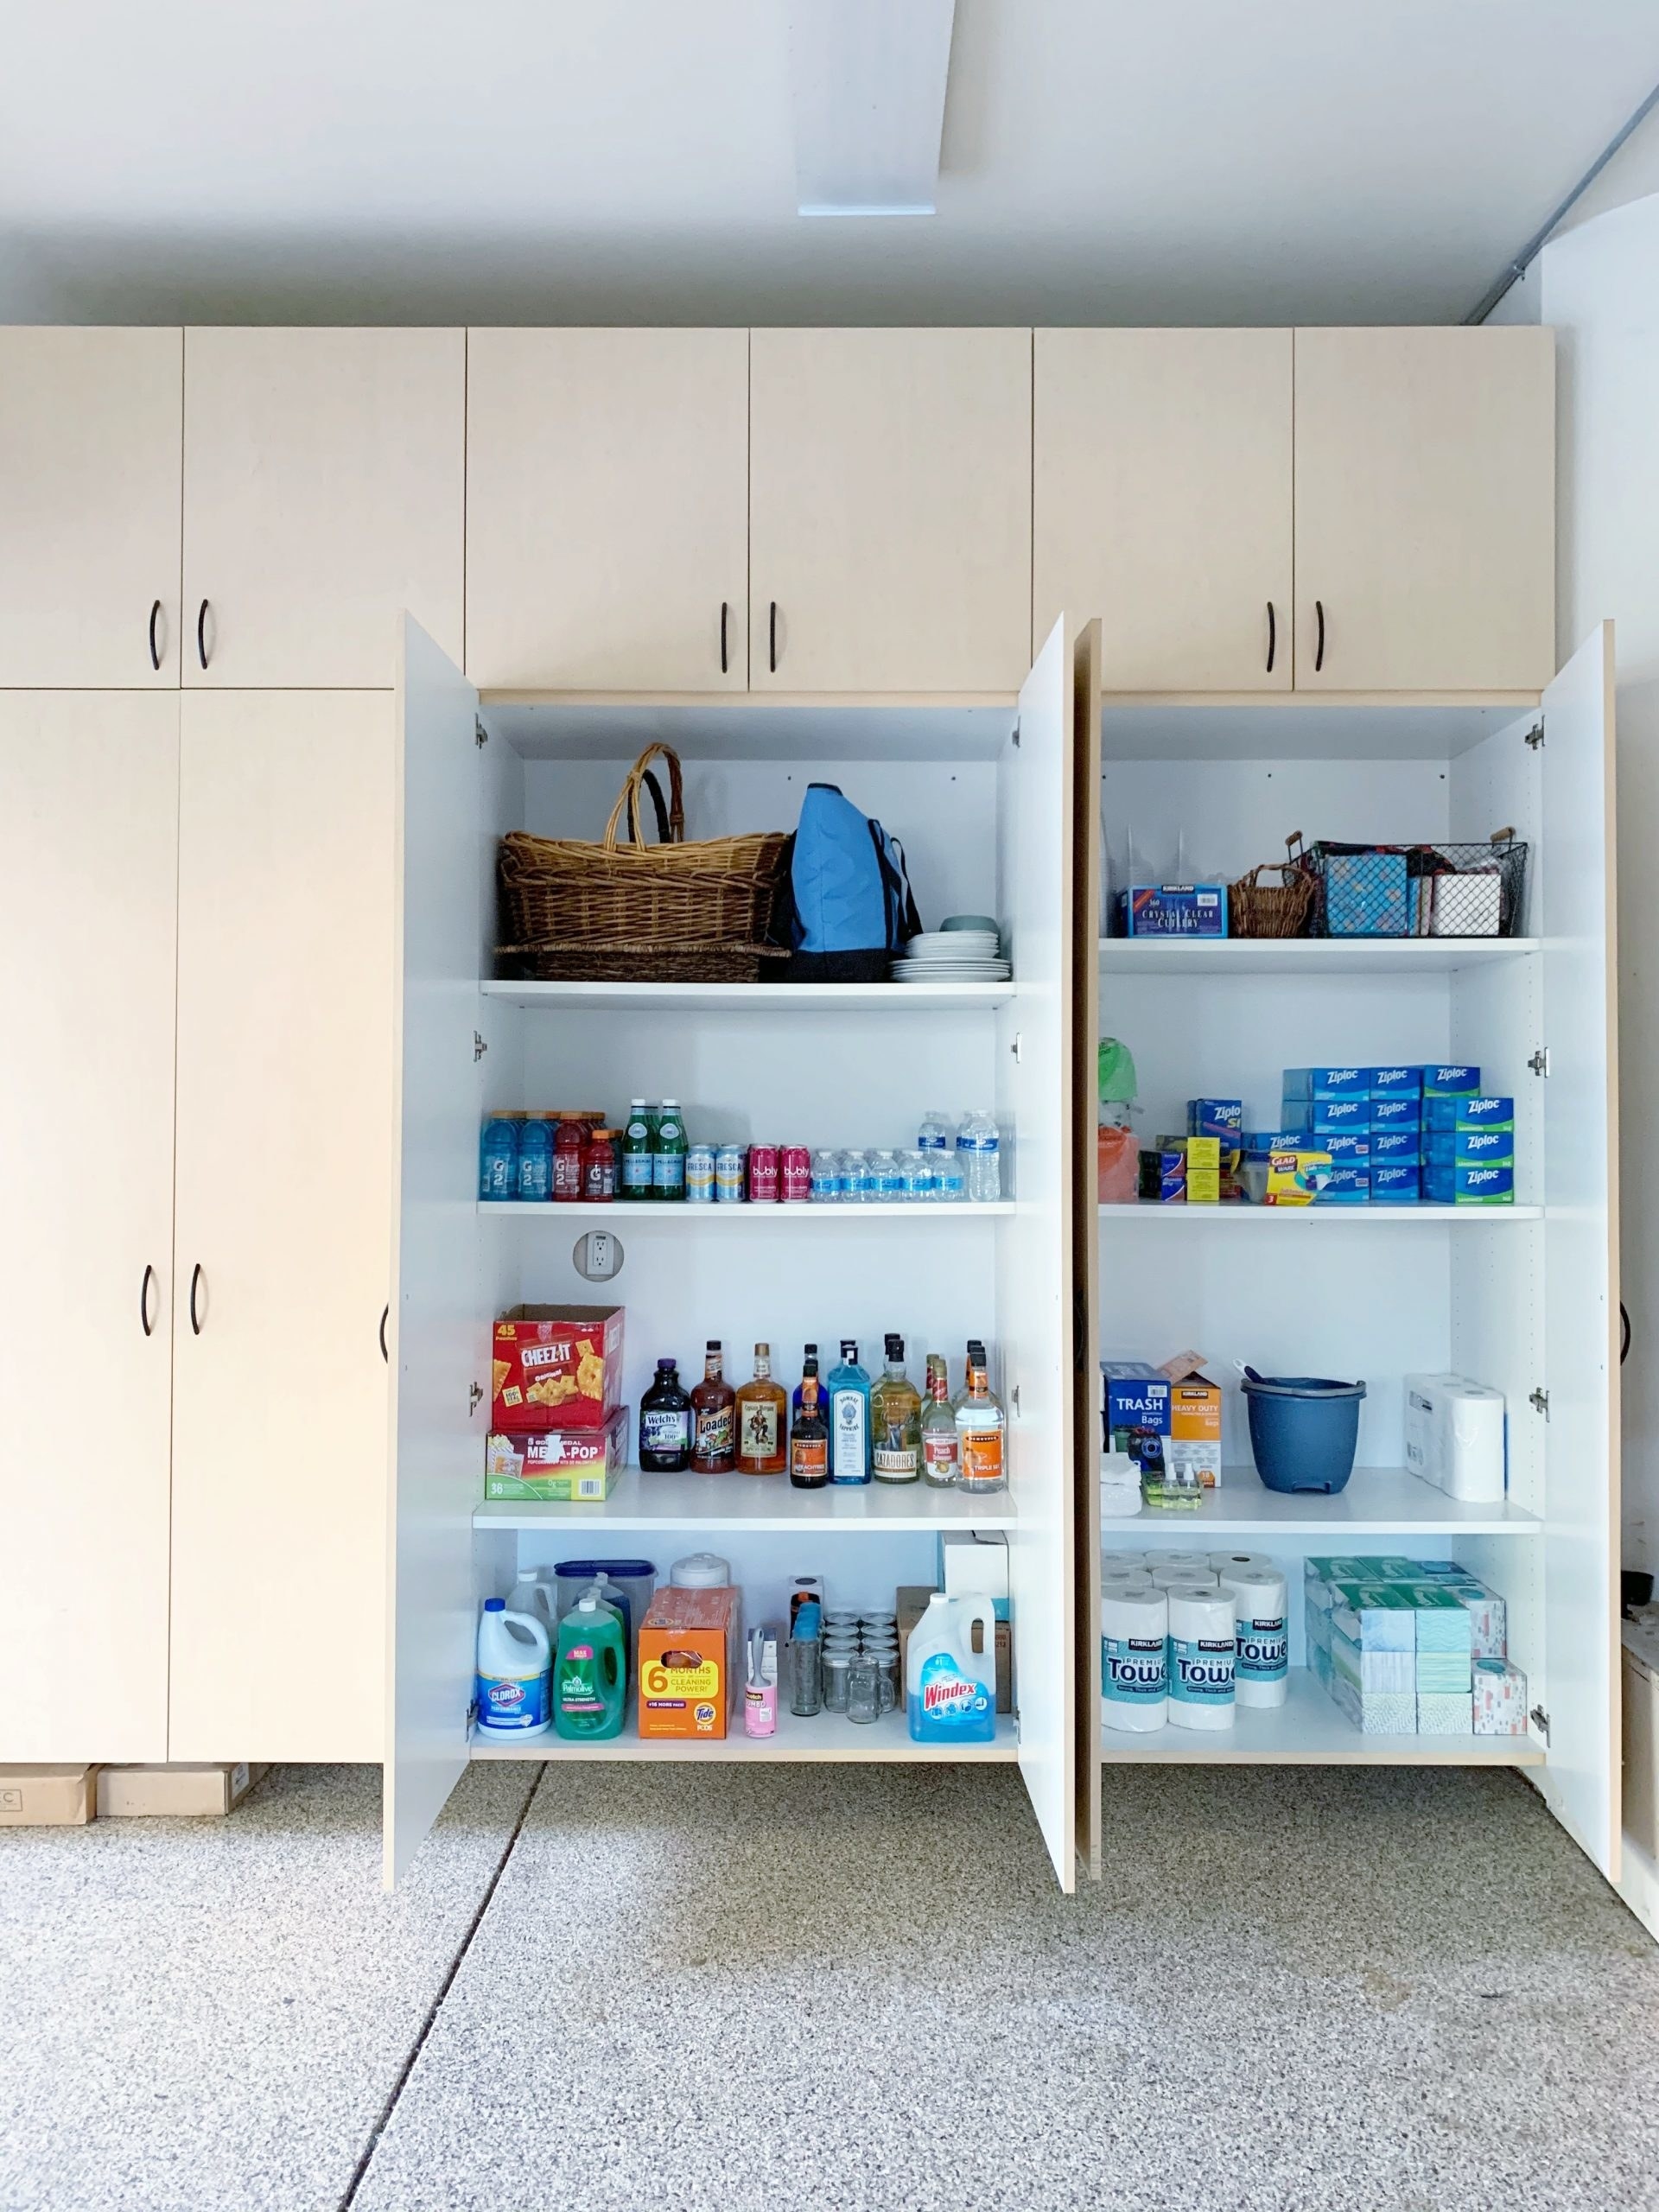 12 things you need to organize your home, according to 'The Home Edit' -  Reviewed